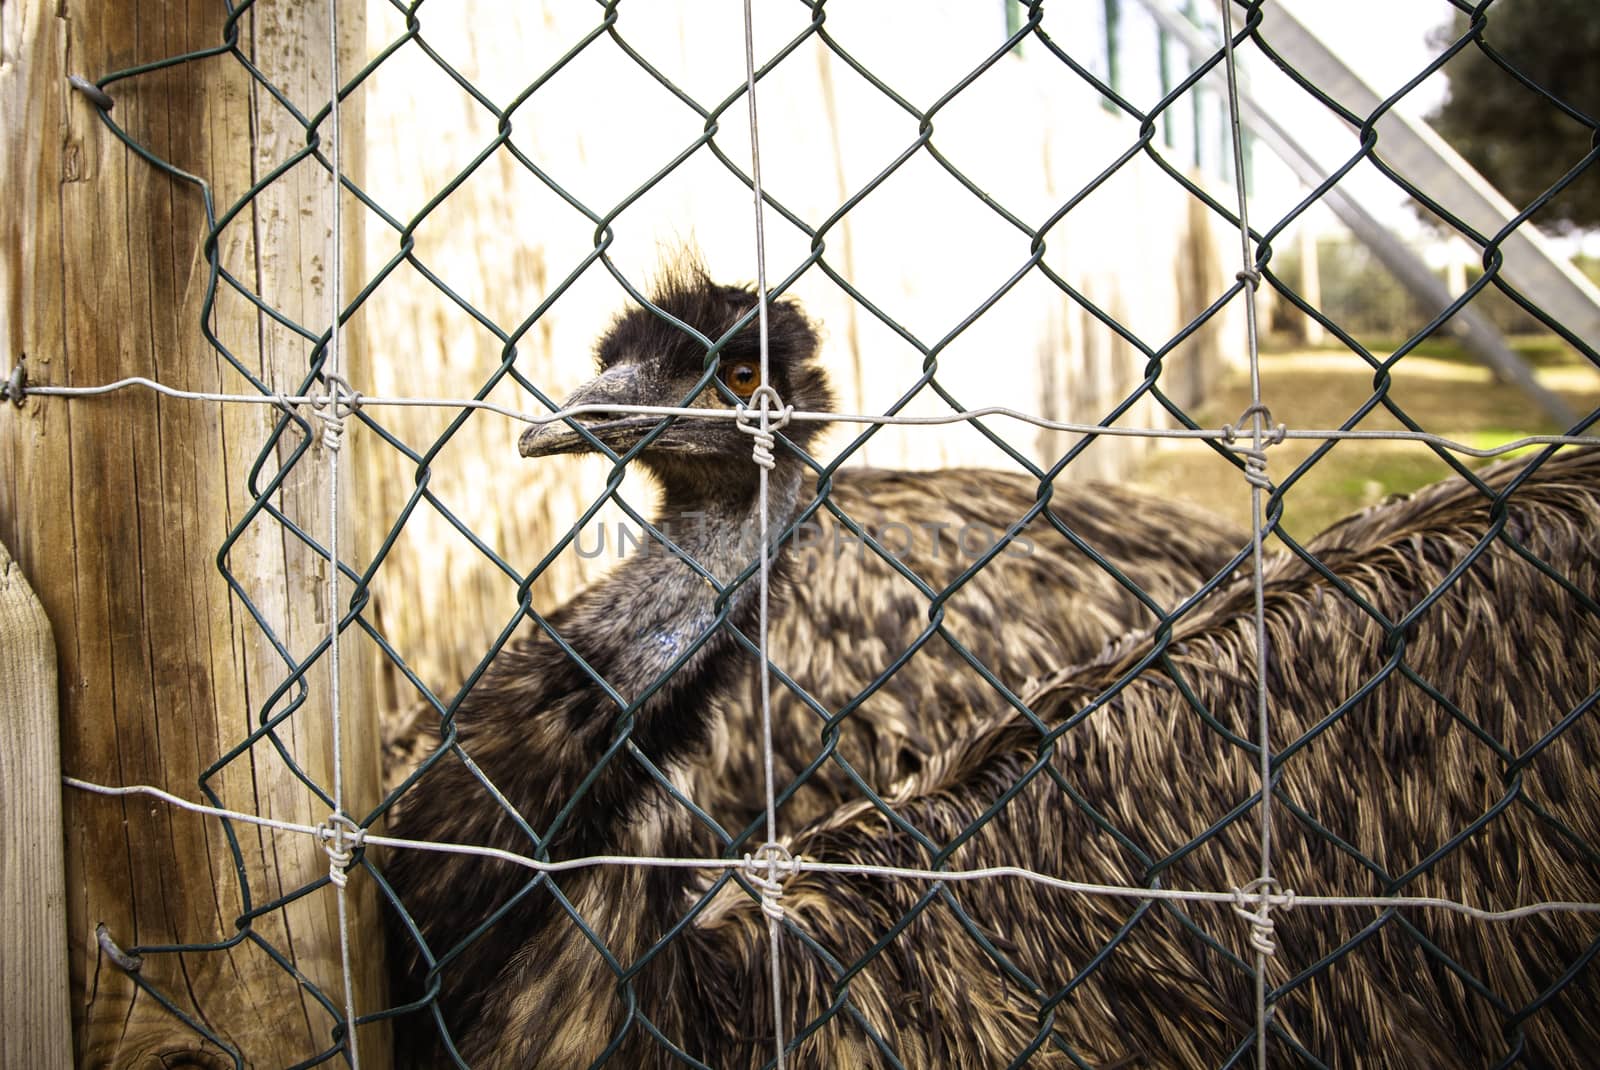 Caged Ostrich by esebene